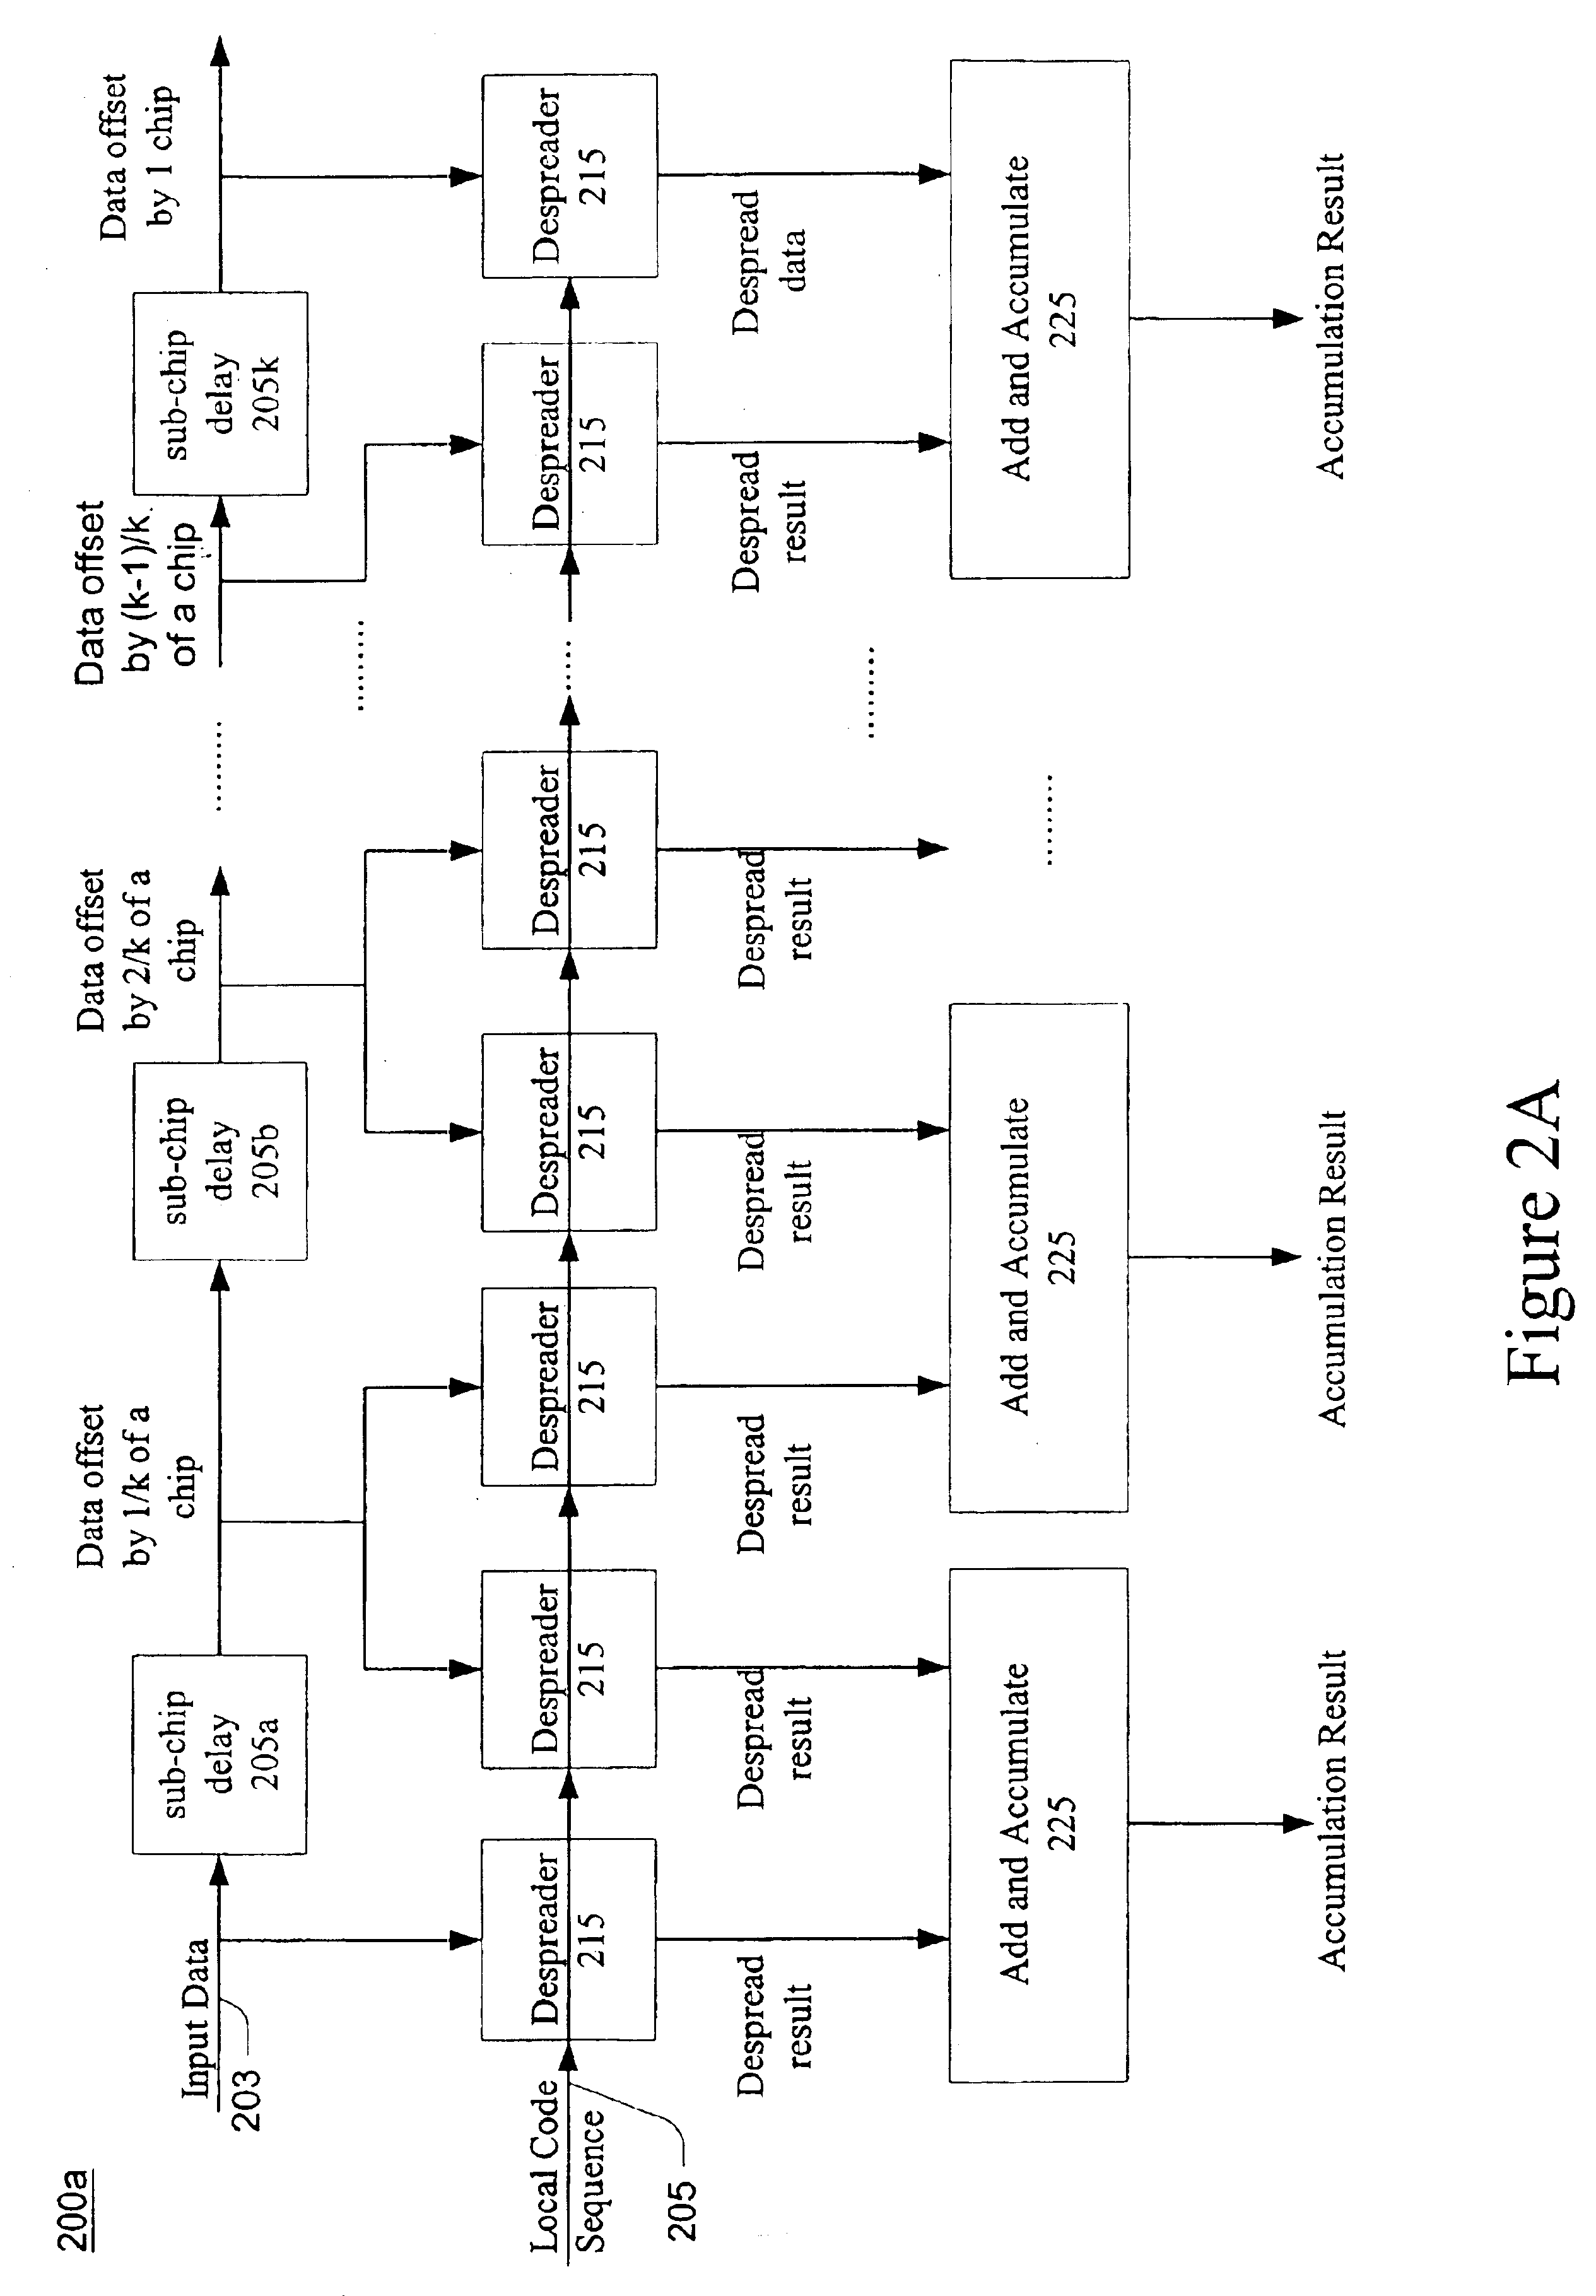 Apparatus and method for sub-chip offset correlation in spread-spectrum communication systems